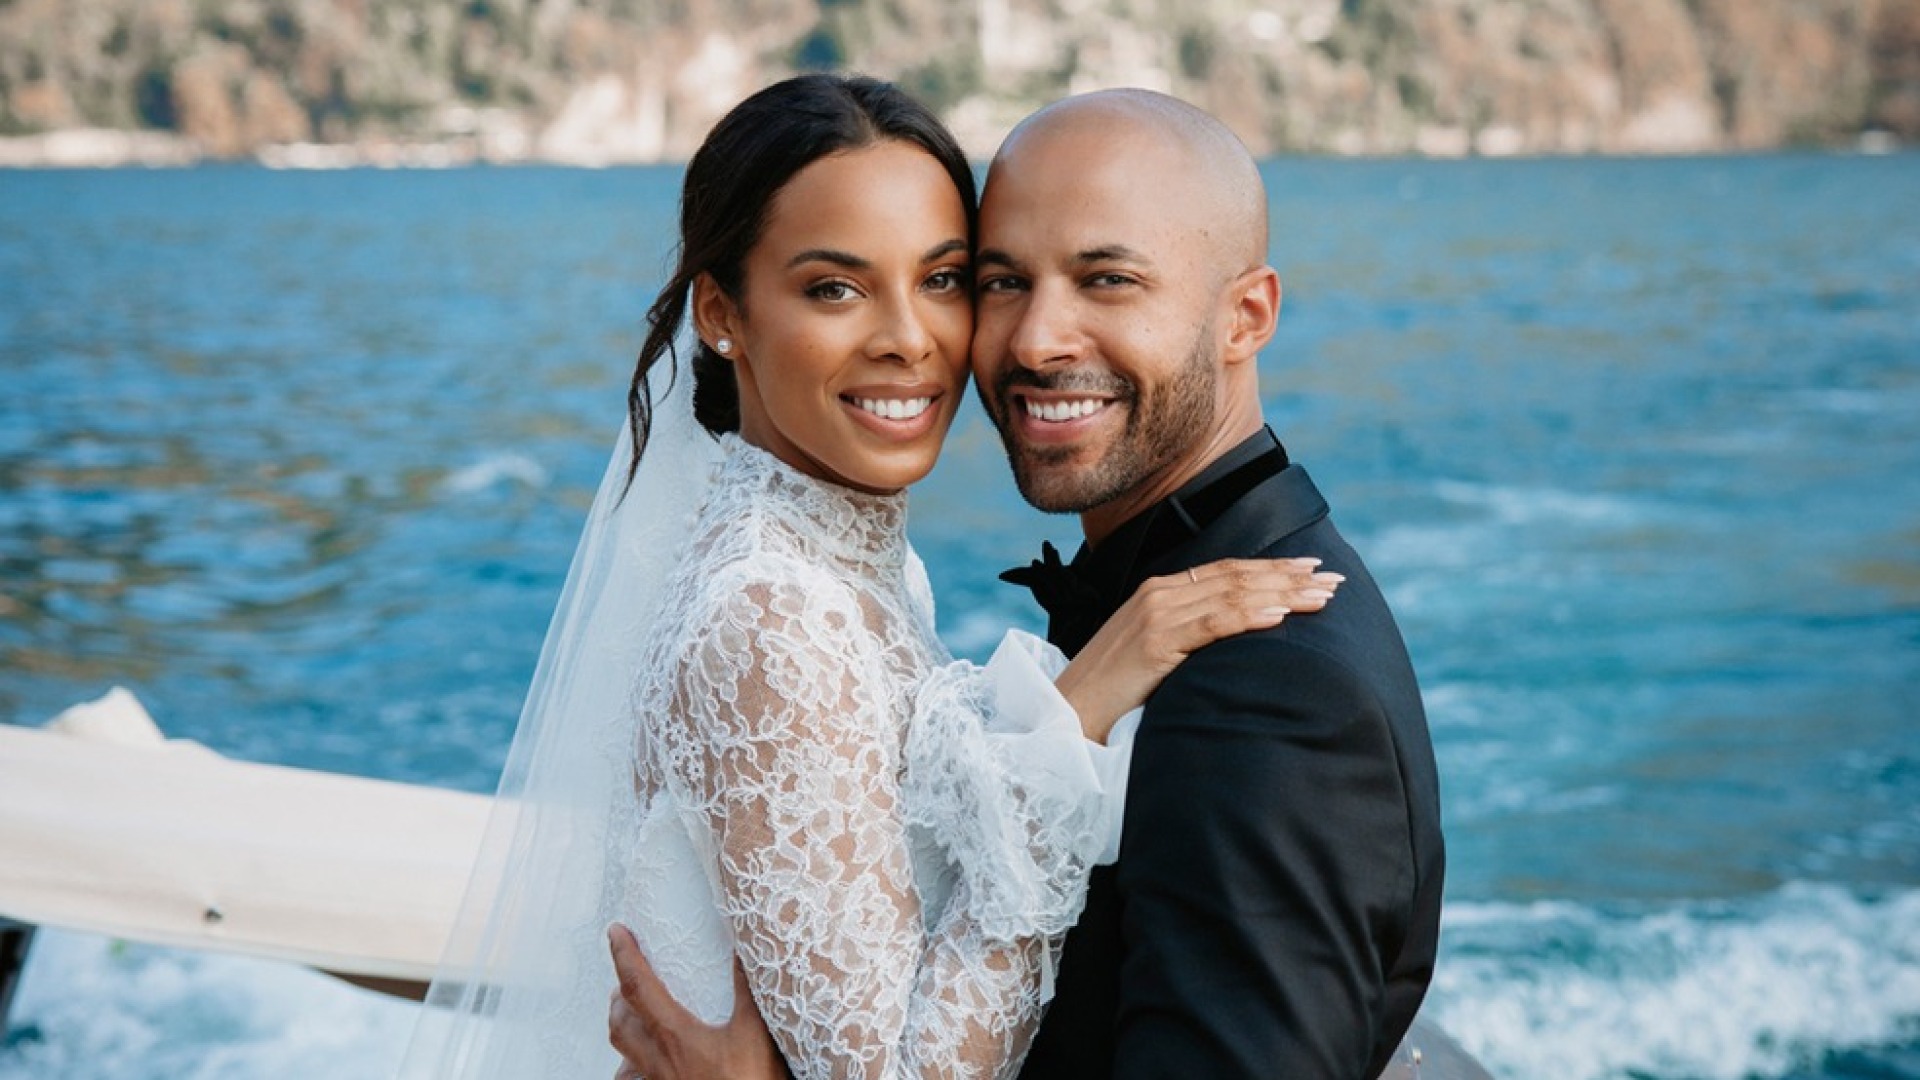 Rochelle looks stunning as she renews Marvin’s wedding vows during a lavish Italian ceremony